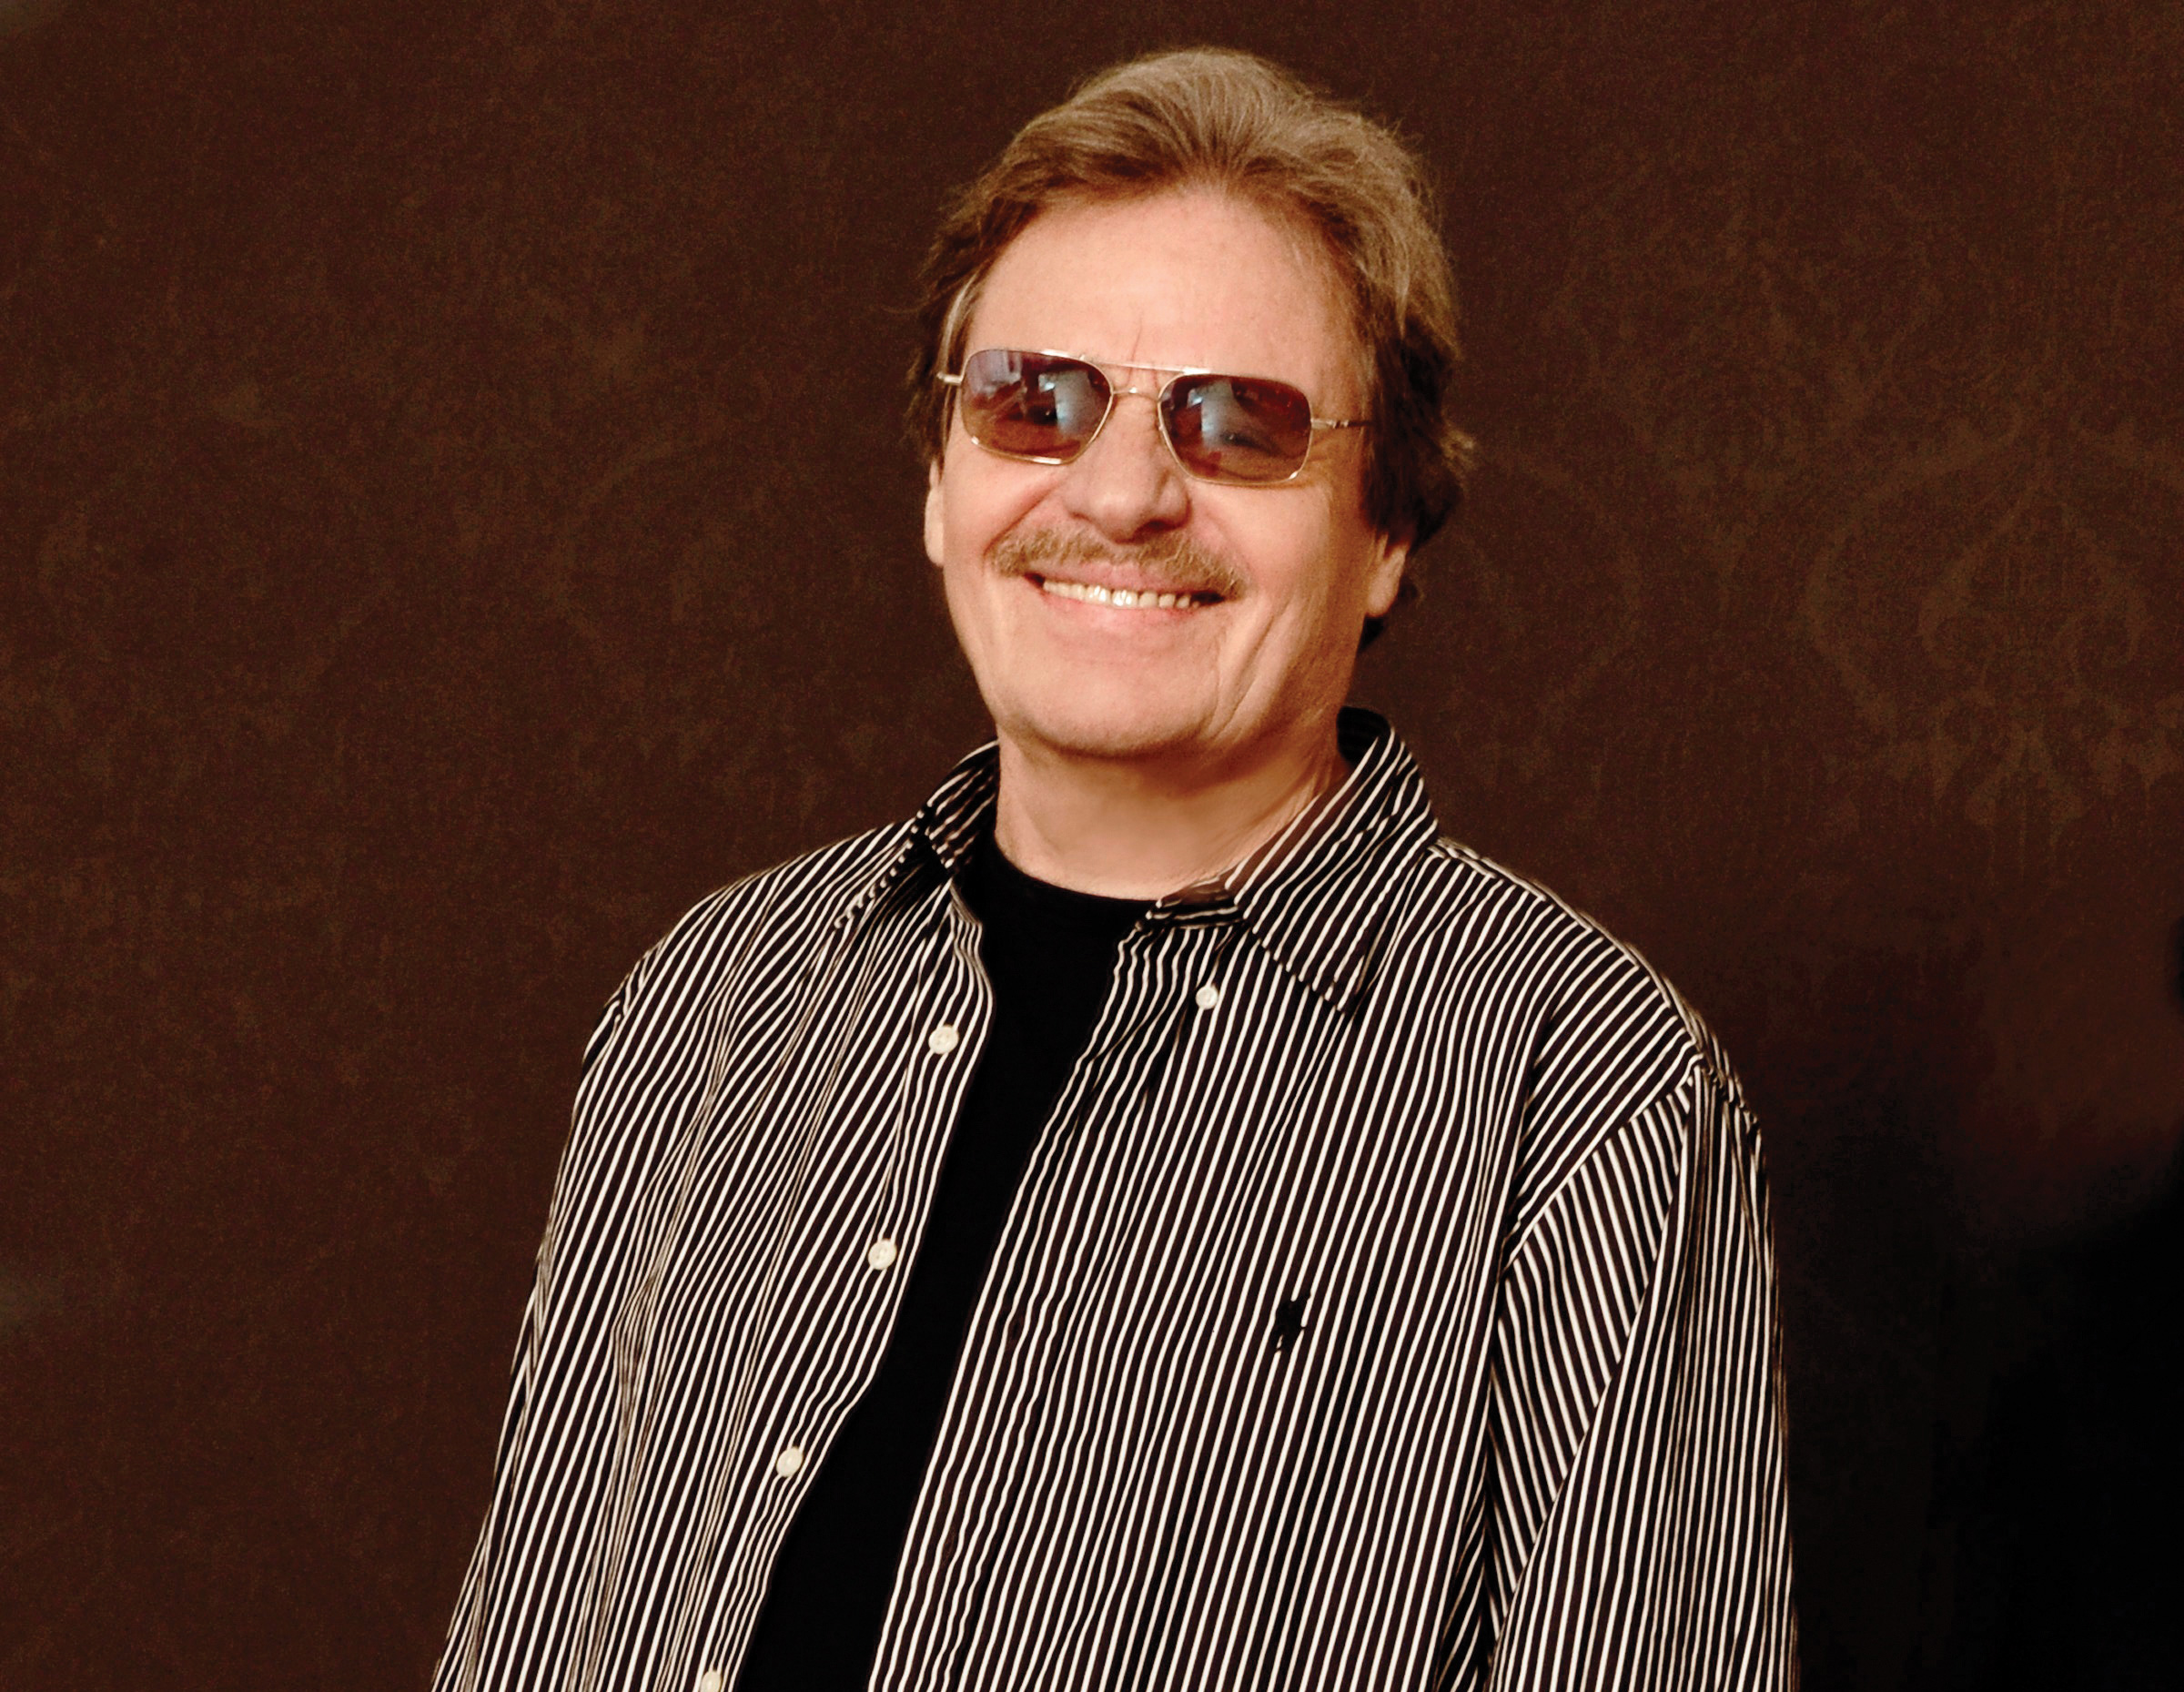 Three time Grammy winner Delbert McClinton will headline the Rotary Pavilion stage at Boom Days this year